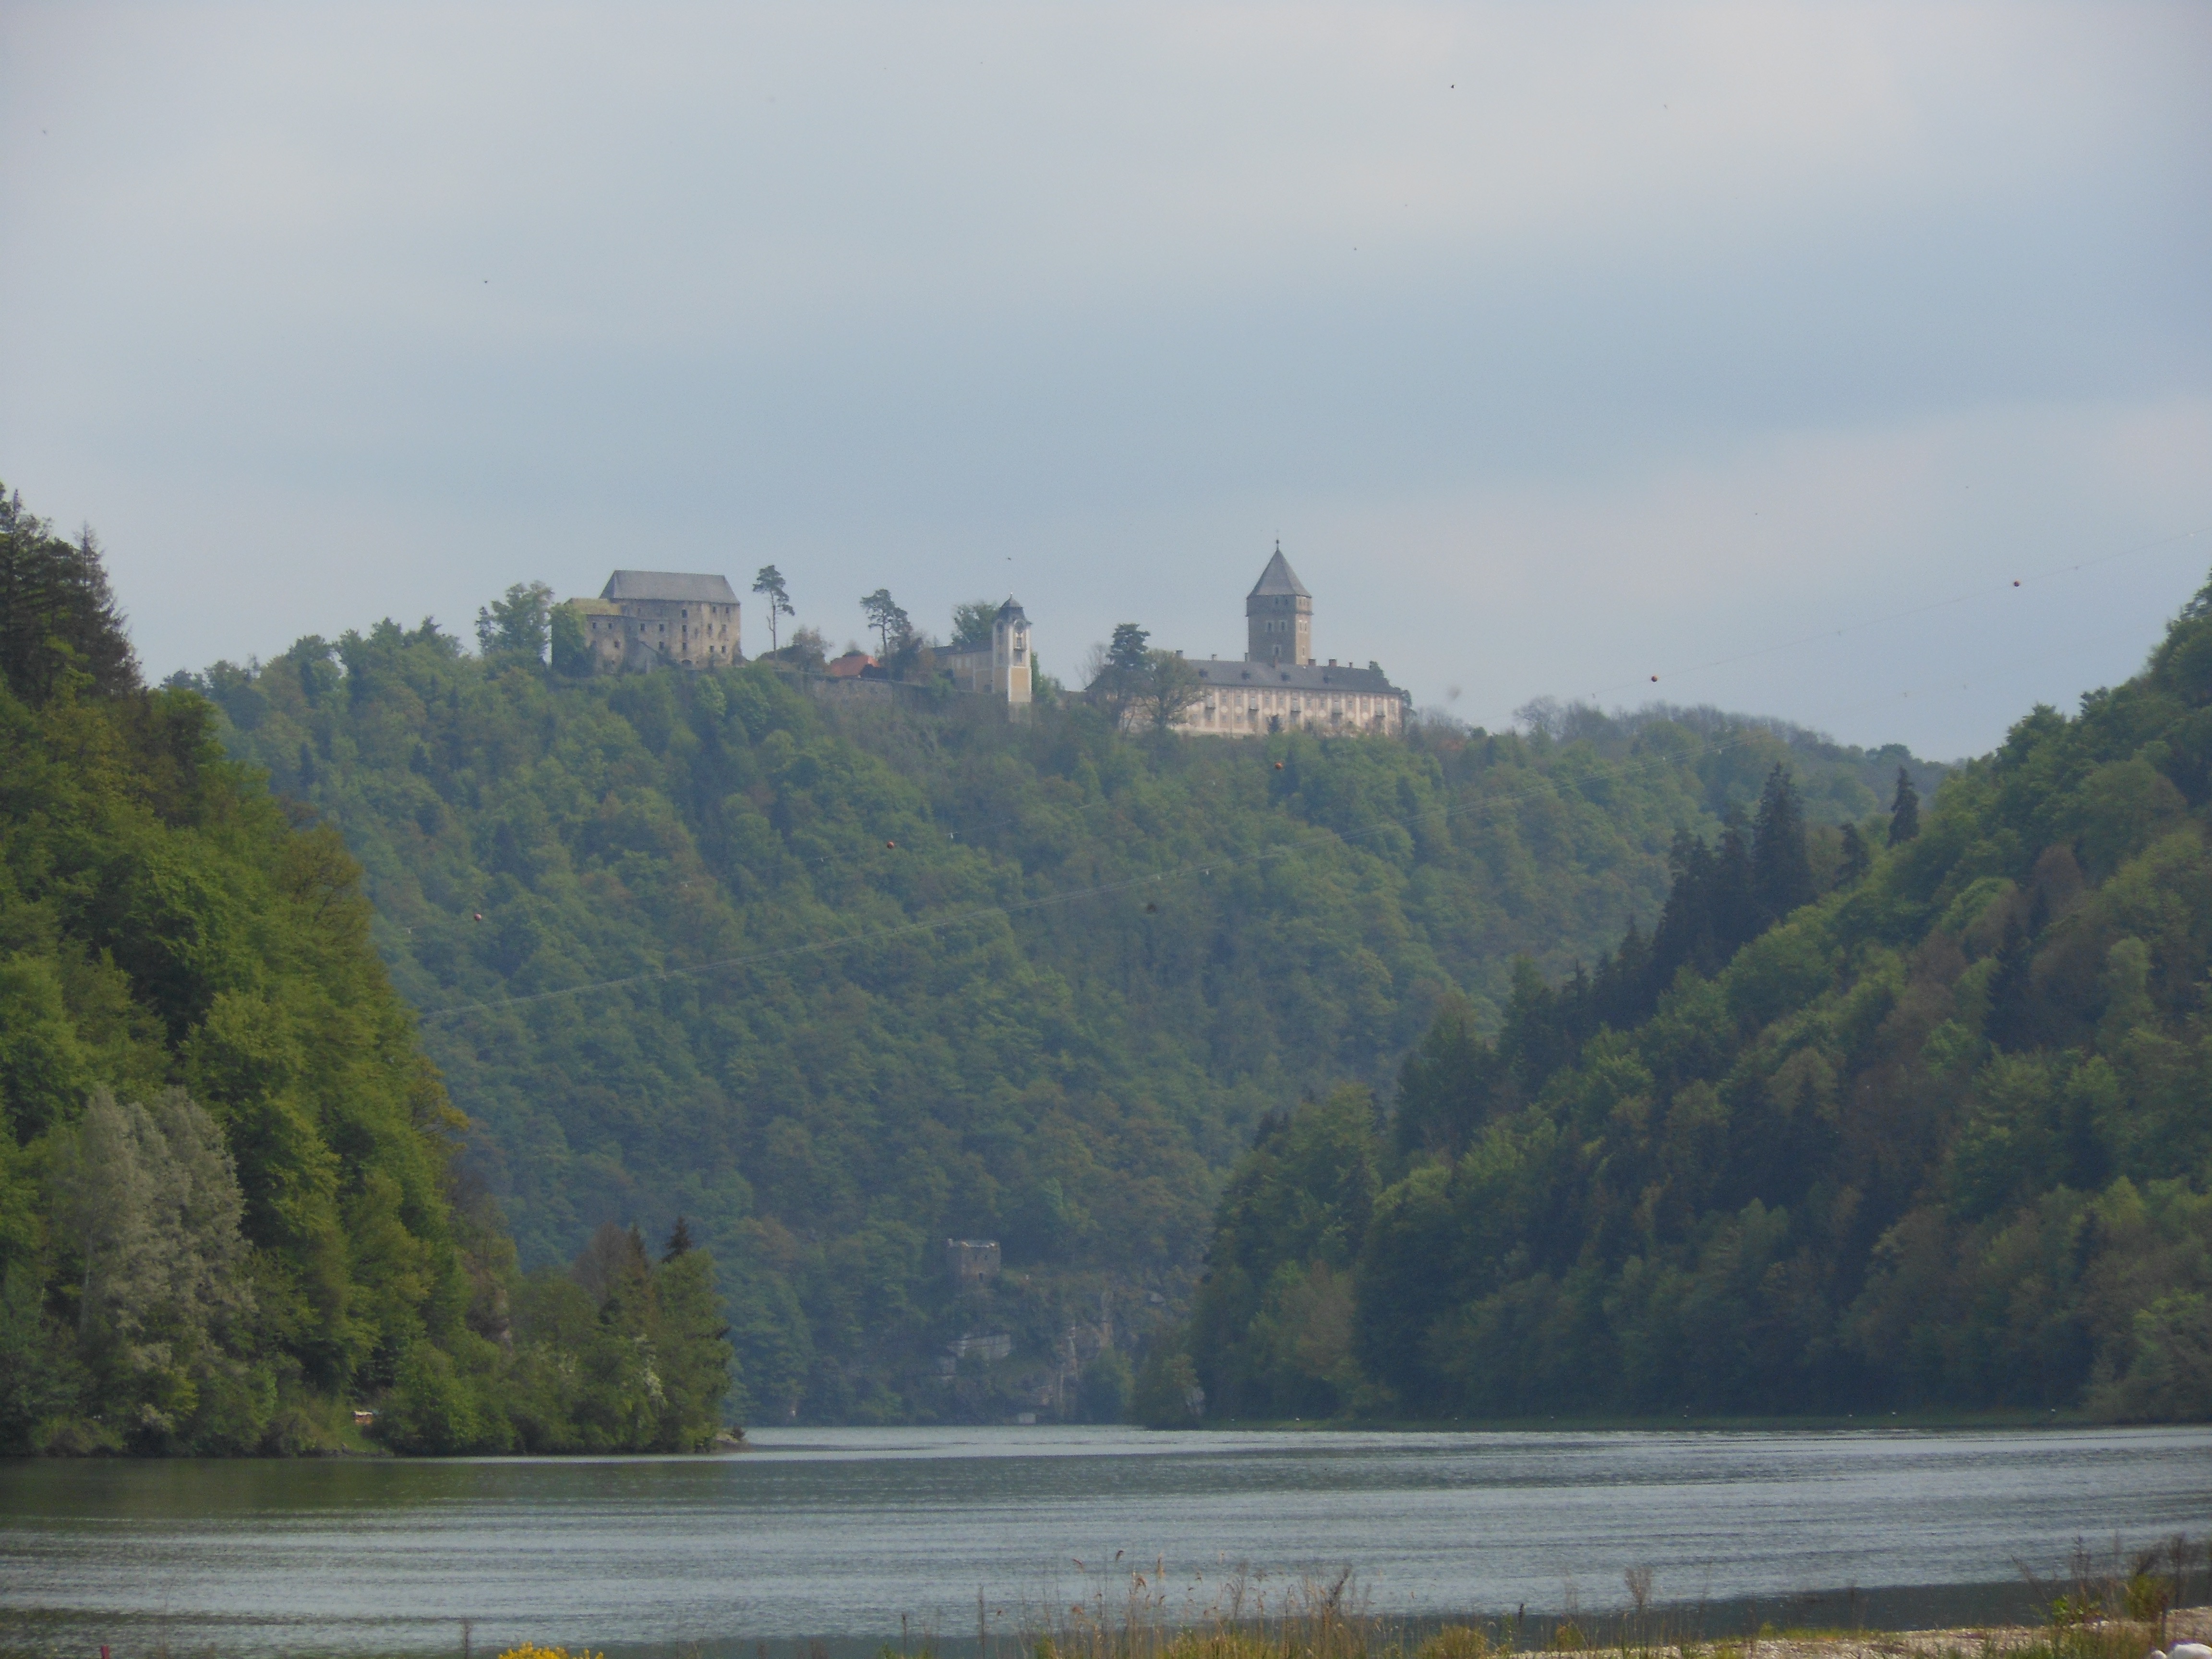 Distant castles and monasteries